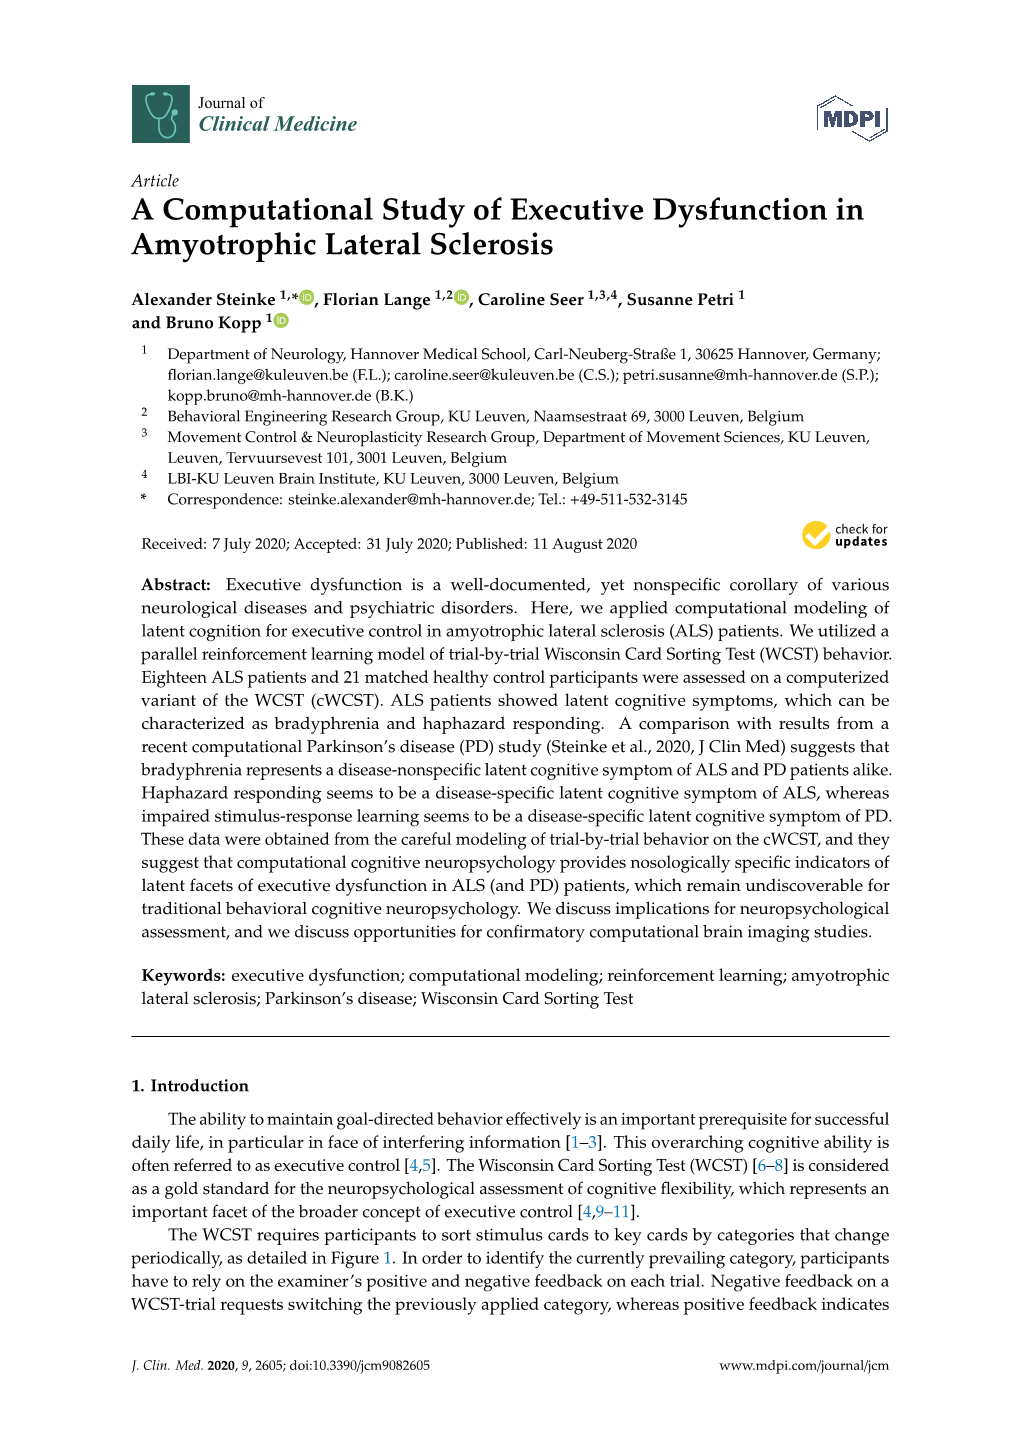 A Computational Study of Executive Dysfunction in Amyotrophic Lateral Sclerosis